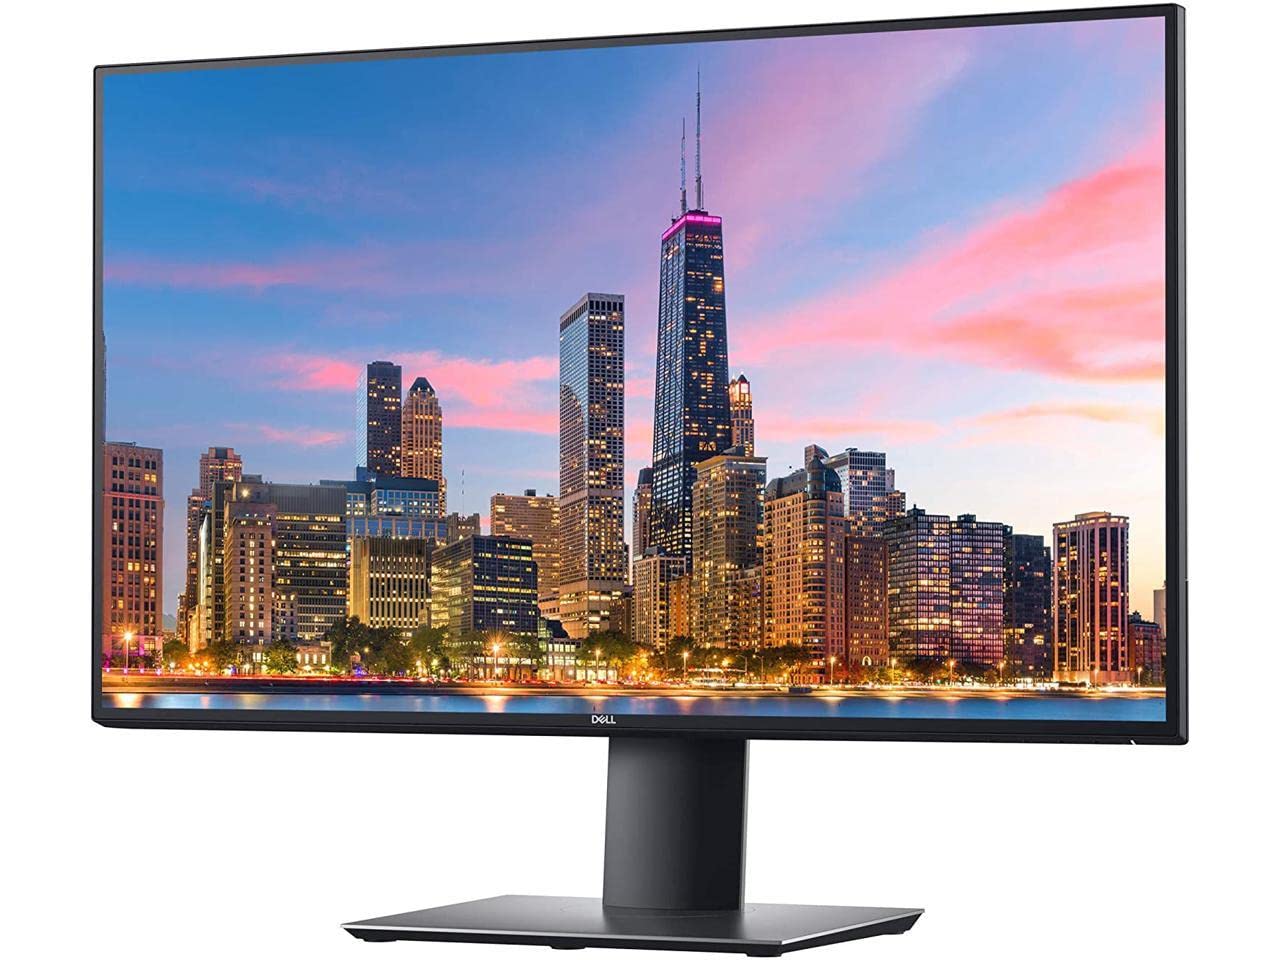 Dell UltraSharp U2720Q 27" LCD LED Monitor - 3840 x 2160 4K Display - 60 Hz Refresh Rate - in-Plane Switching Technology